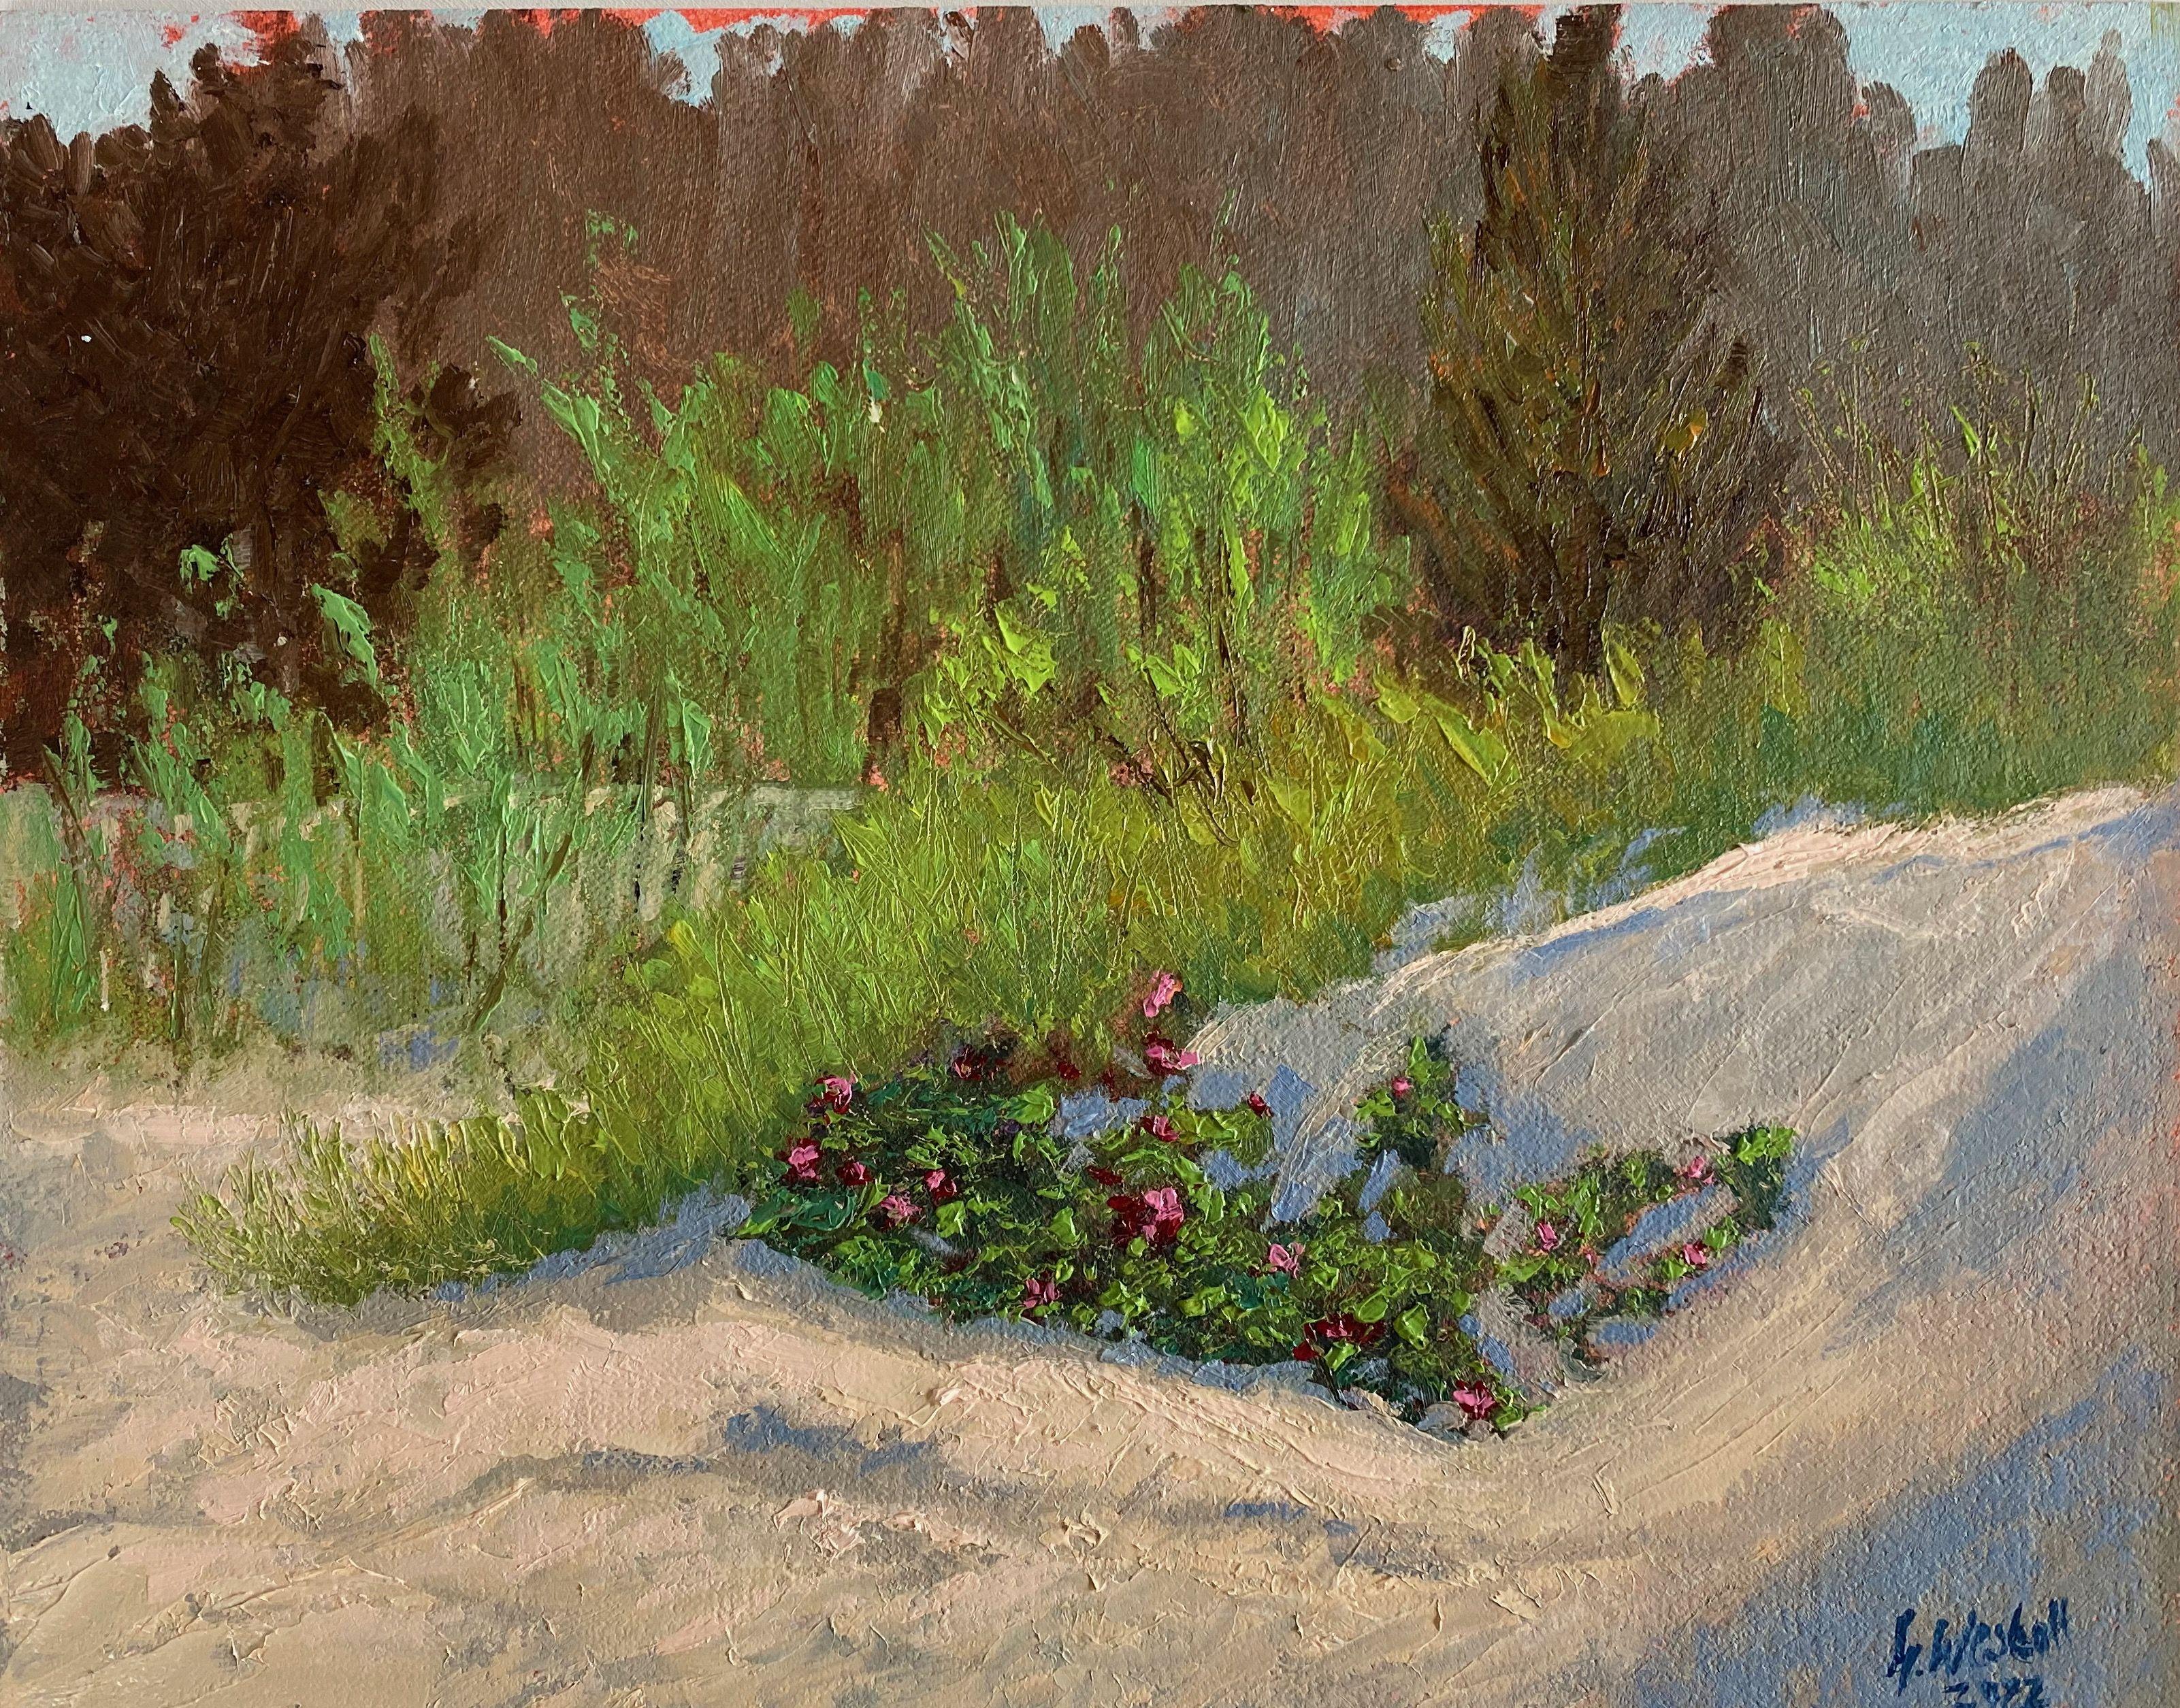 Plein air, Poland, 2022.  Painted between the dunes at Lazy Beach. The beach is located on a promontory between the Baltic Sea and the Jamno Lake near Mielno, both of which are connected by a canal. As I walked around through the dunes looking for a